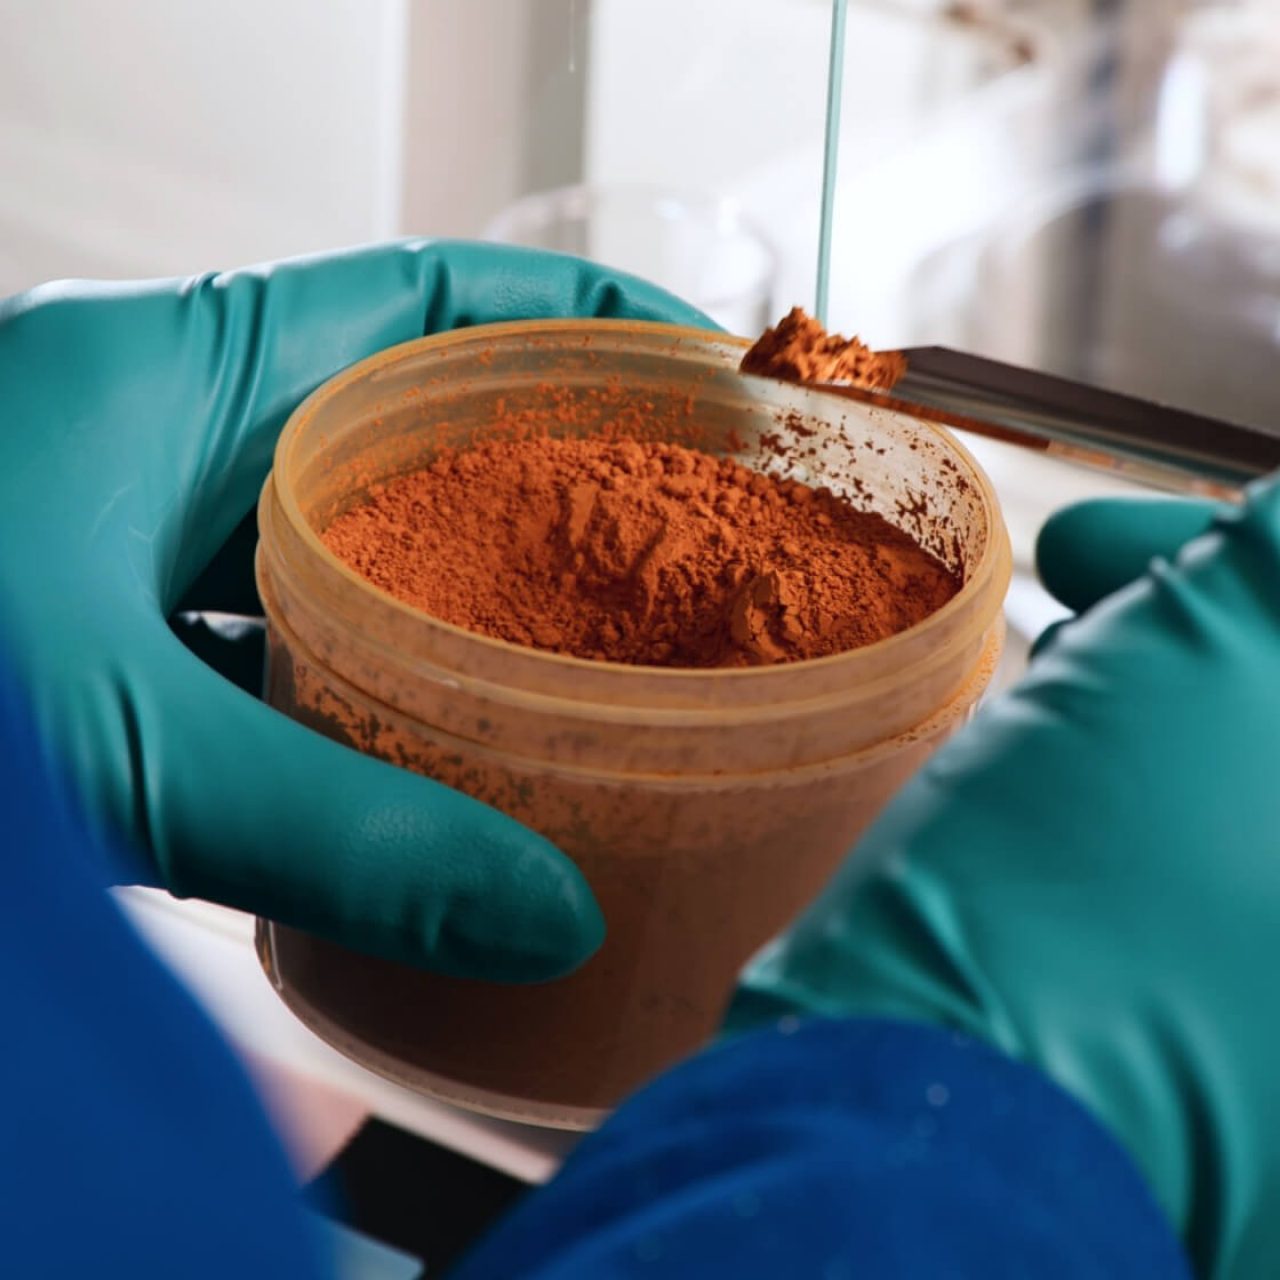 A copper colored powder is carefully spooned out of a container.